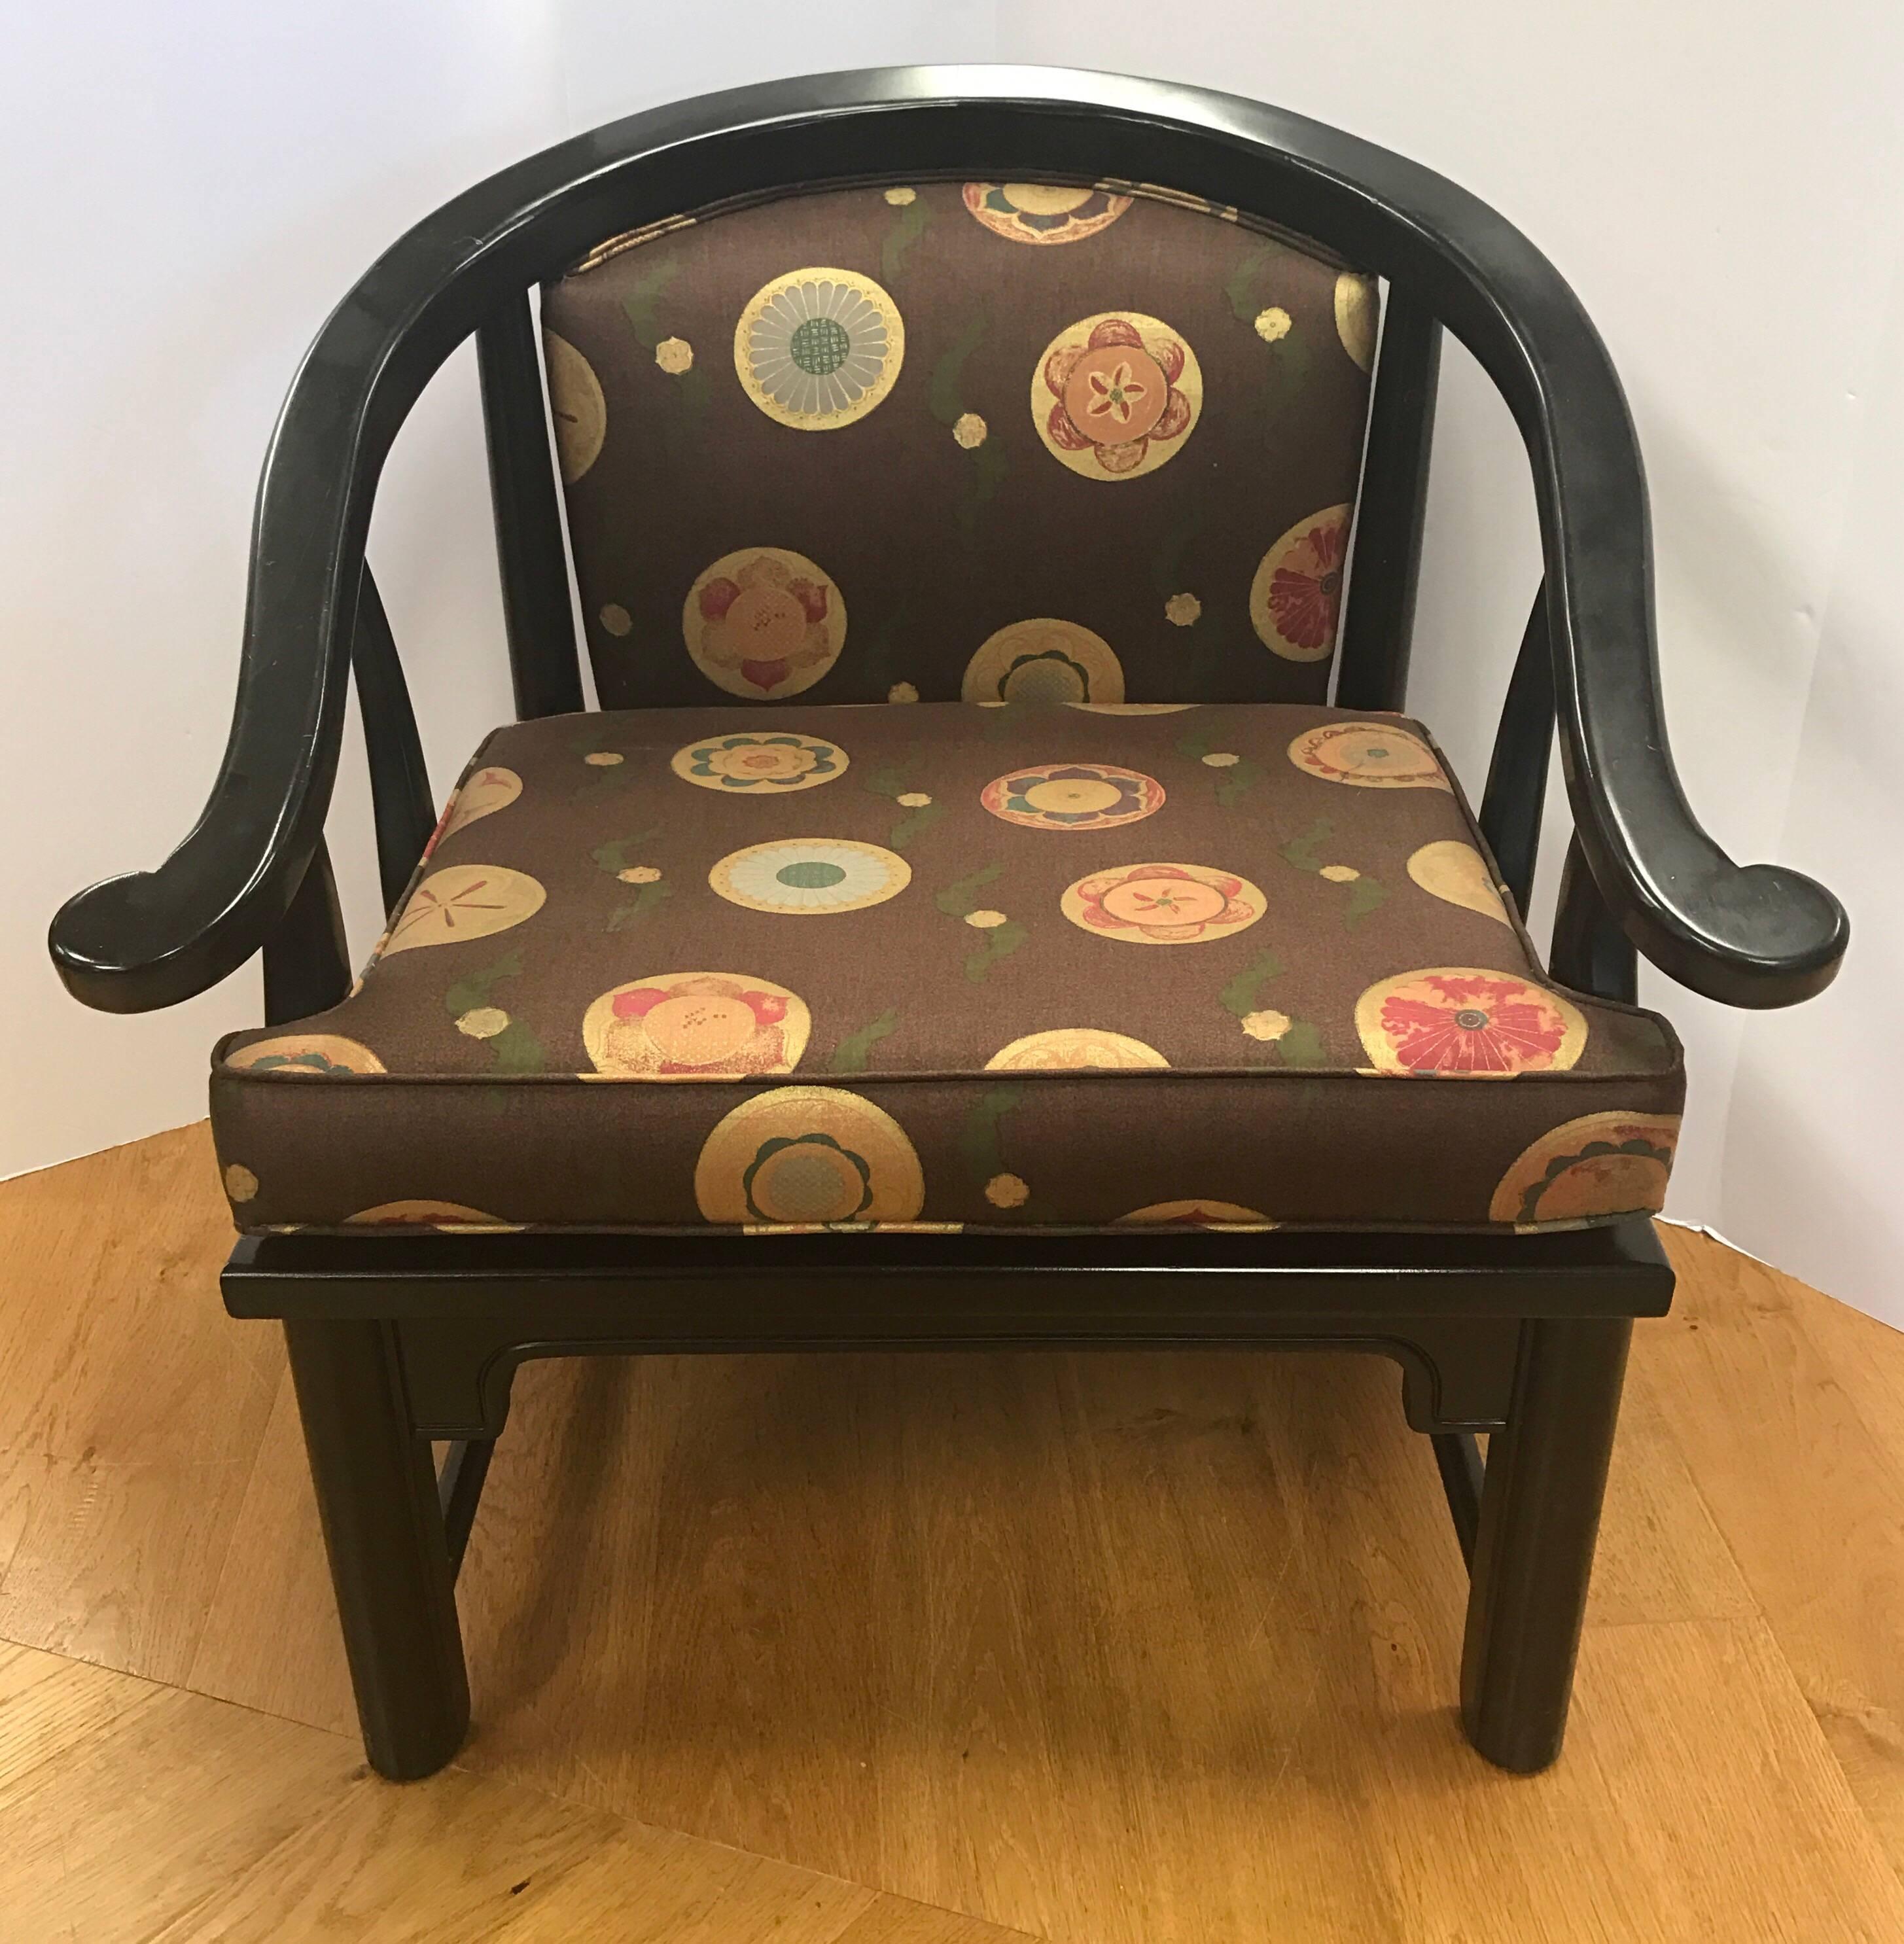 Classic James Mont style black mid century horseshoe chairs. Seat fabric is geometric and gorgeous.